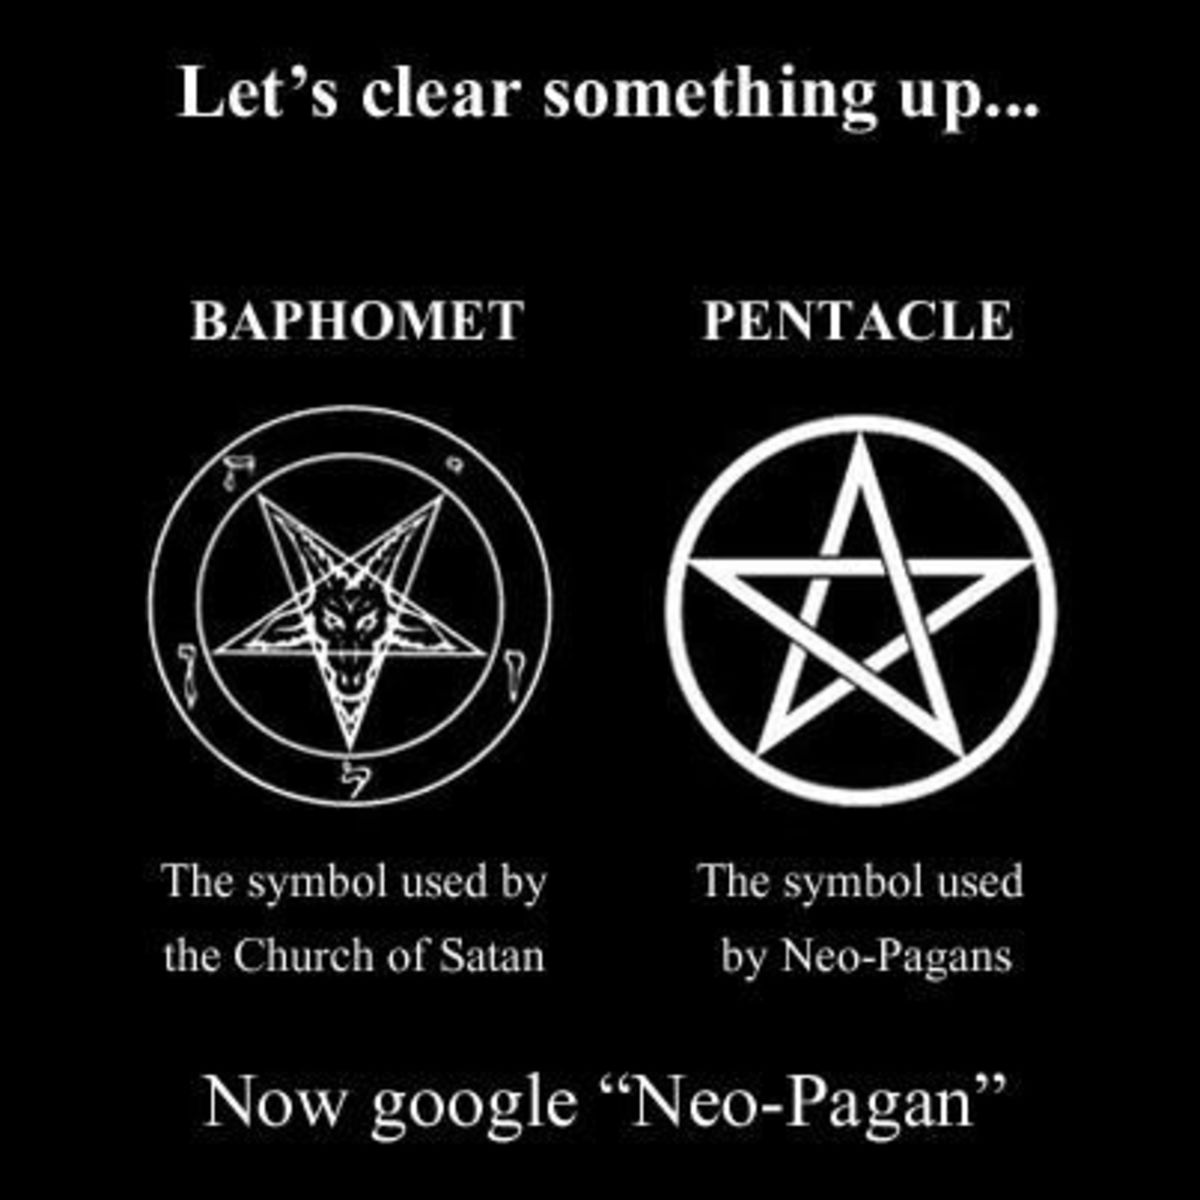 *Note that Neo Pagans commonly utilize the Pentacle, which is a modified version of a Pentagram and is less commonly associated with the inverted version used to signify evil; its well-intentioned meaning is basically the same.